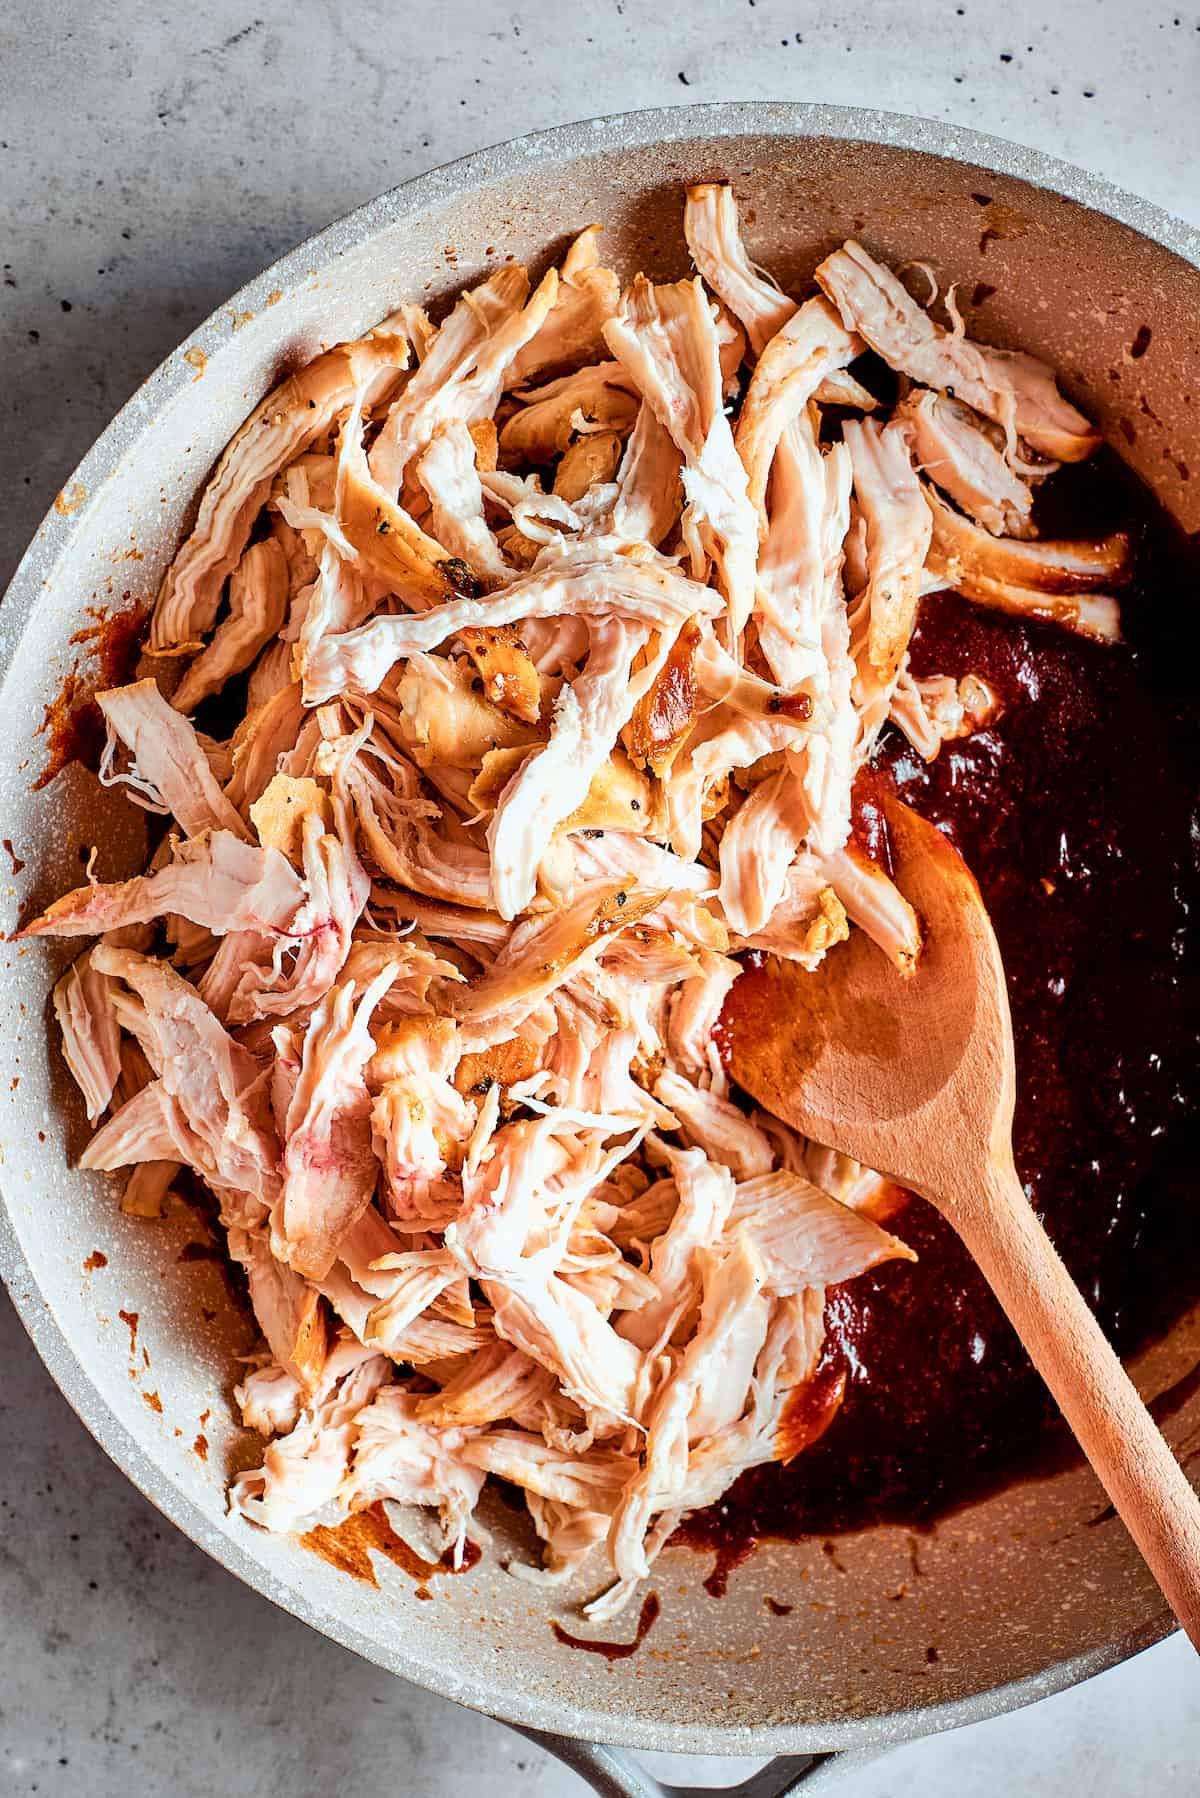 Shredded chicken is stirred into a pot of bbq sauce with a wooden spoon.